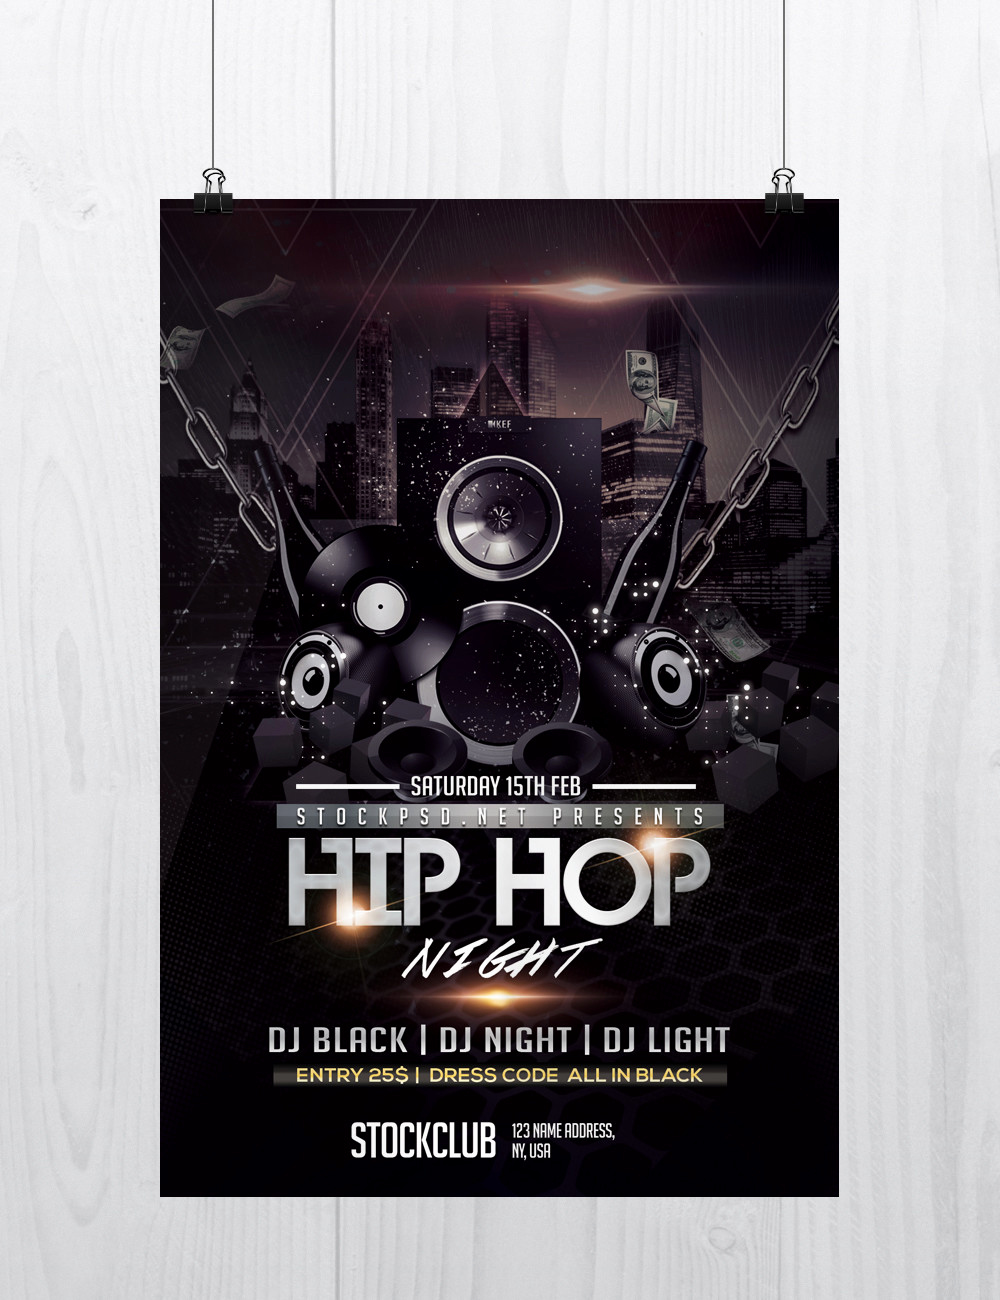 Free Flyers Templates Downloads Inspirational Hip Hop Music Download Free Psd Flyer Template Stockpsd